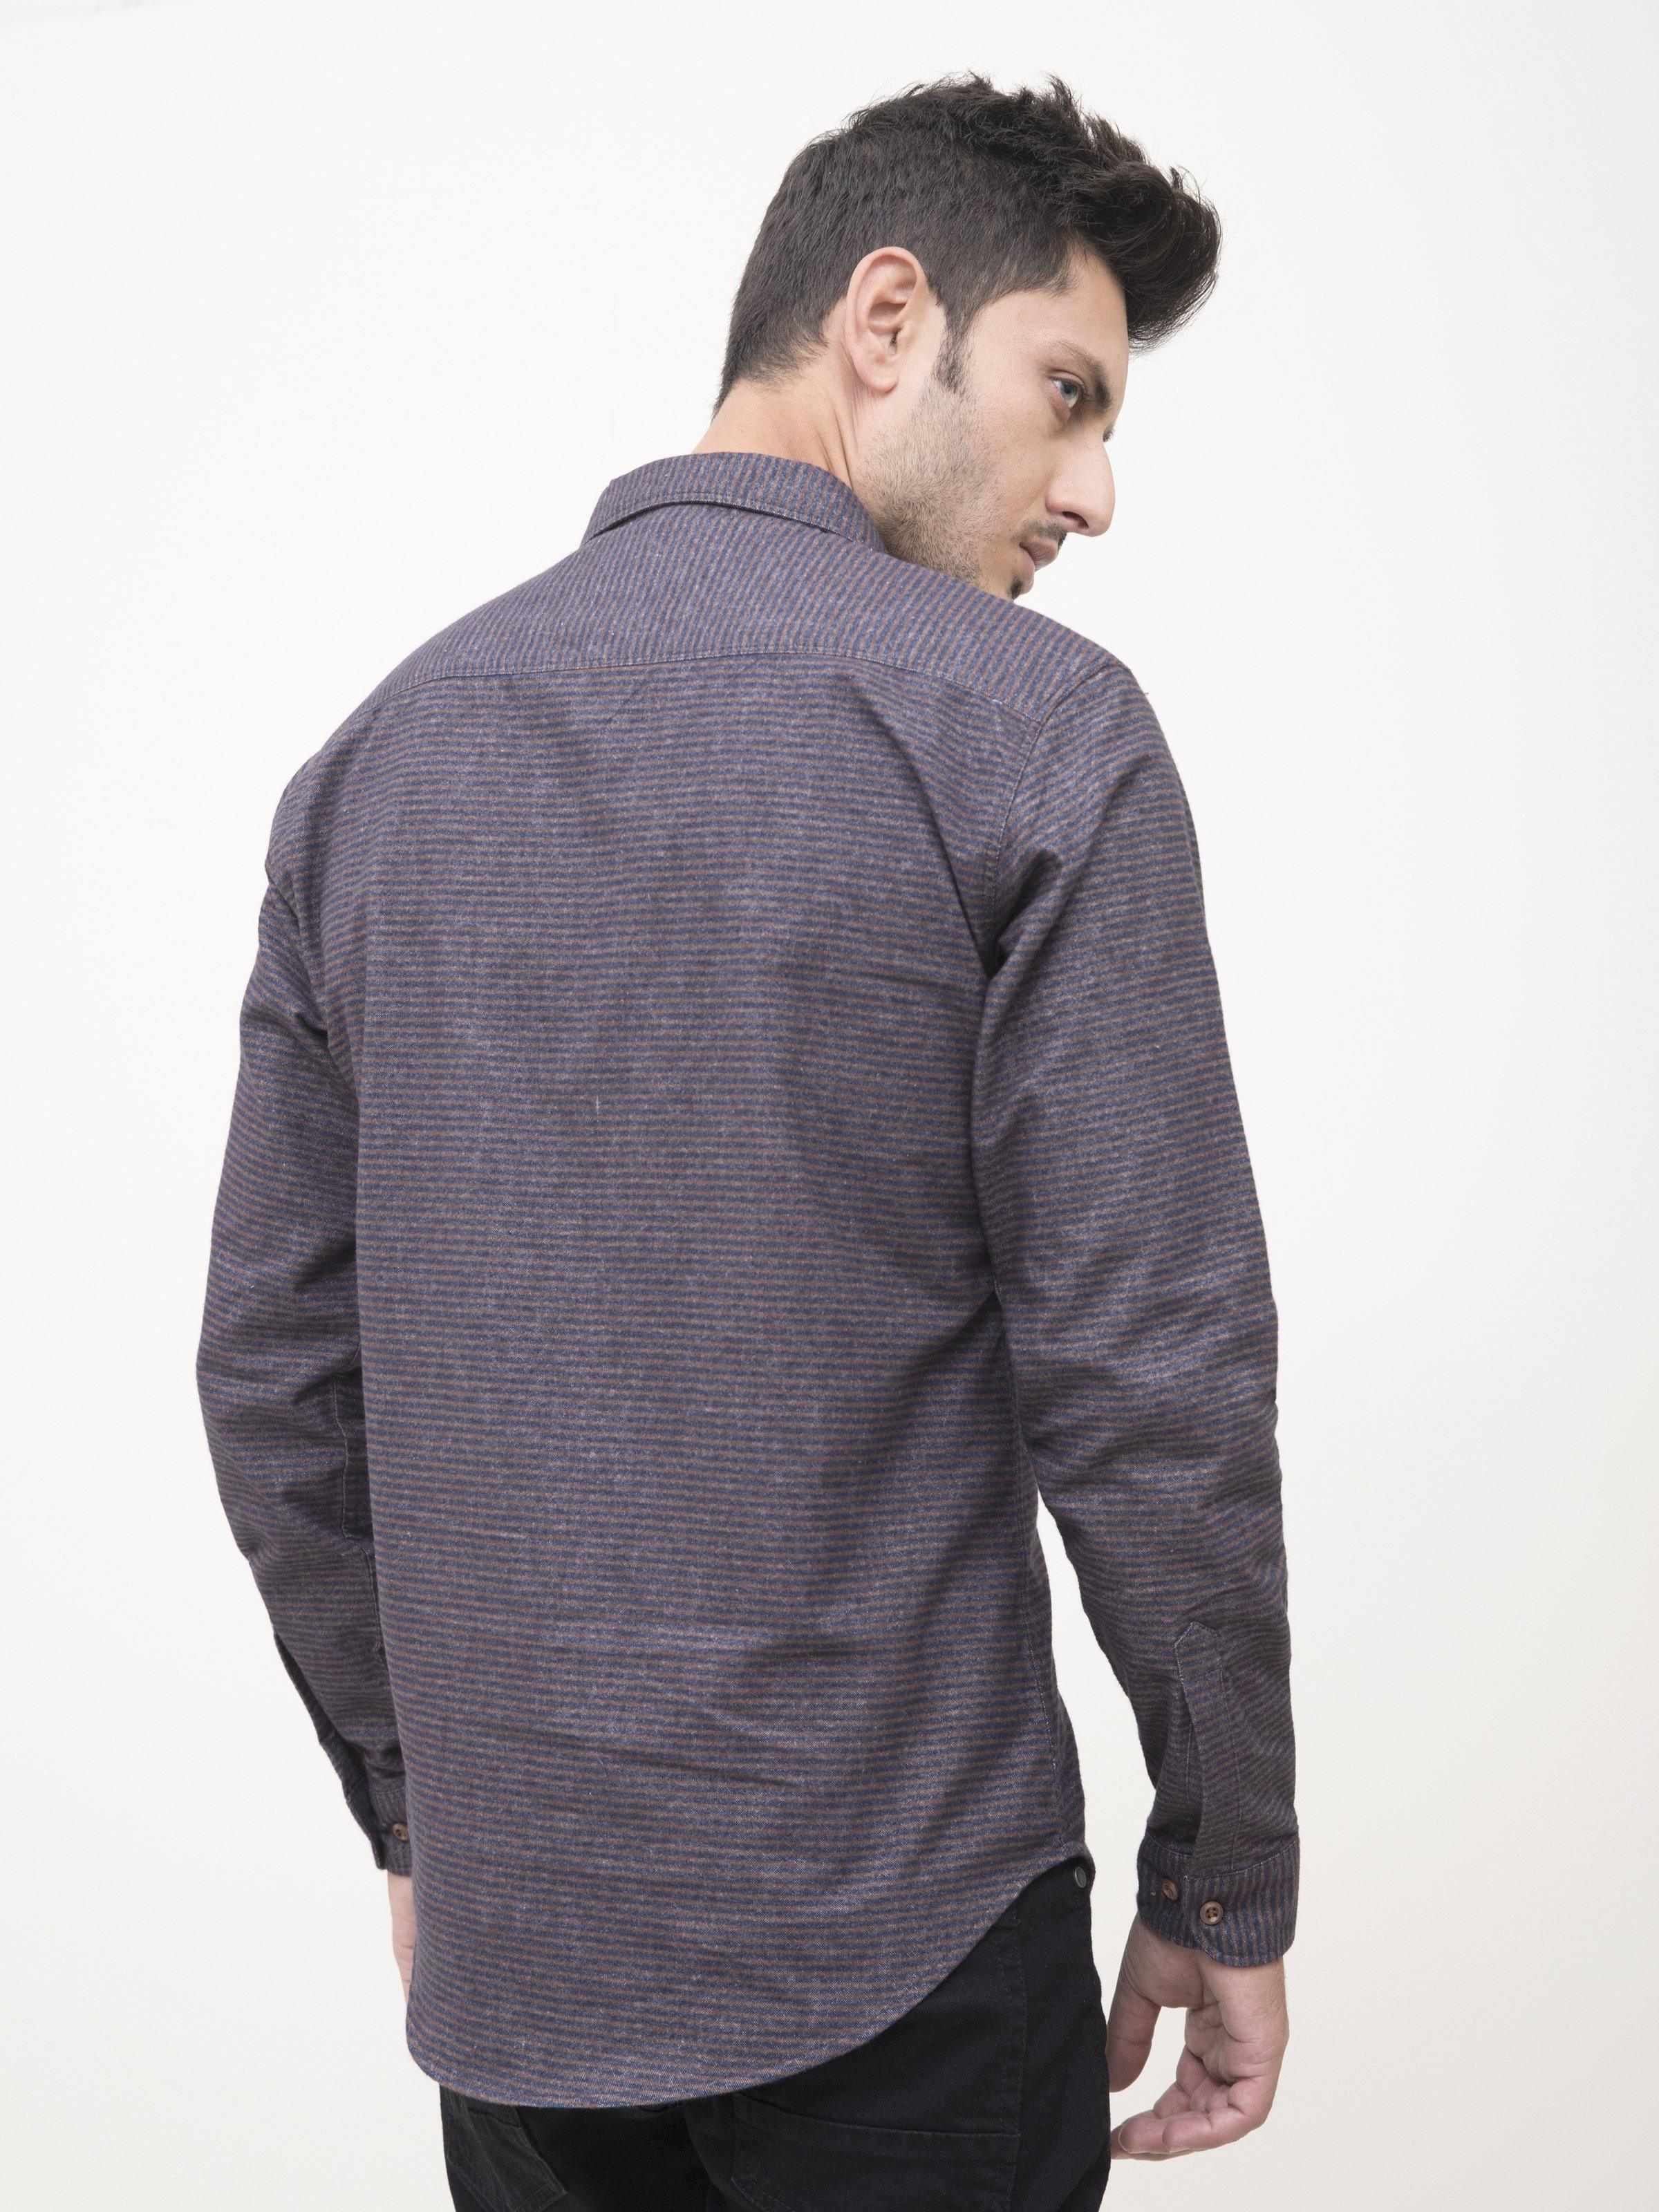 CASUAL SHIRT FULL SLEEVE BROWN BLUE at Charcoal Clothing